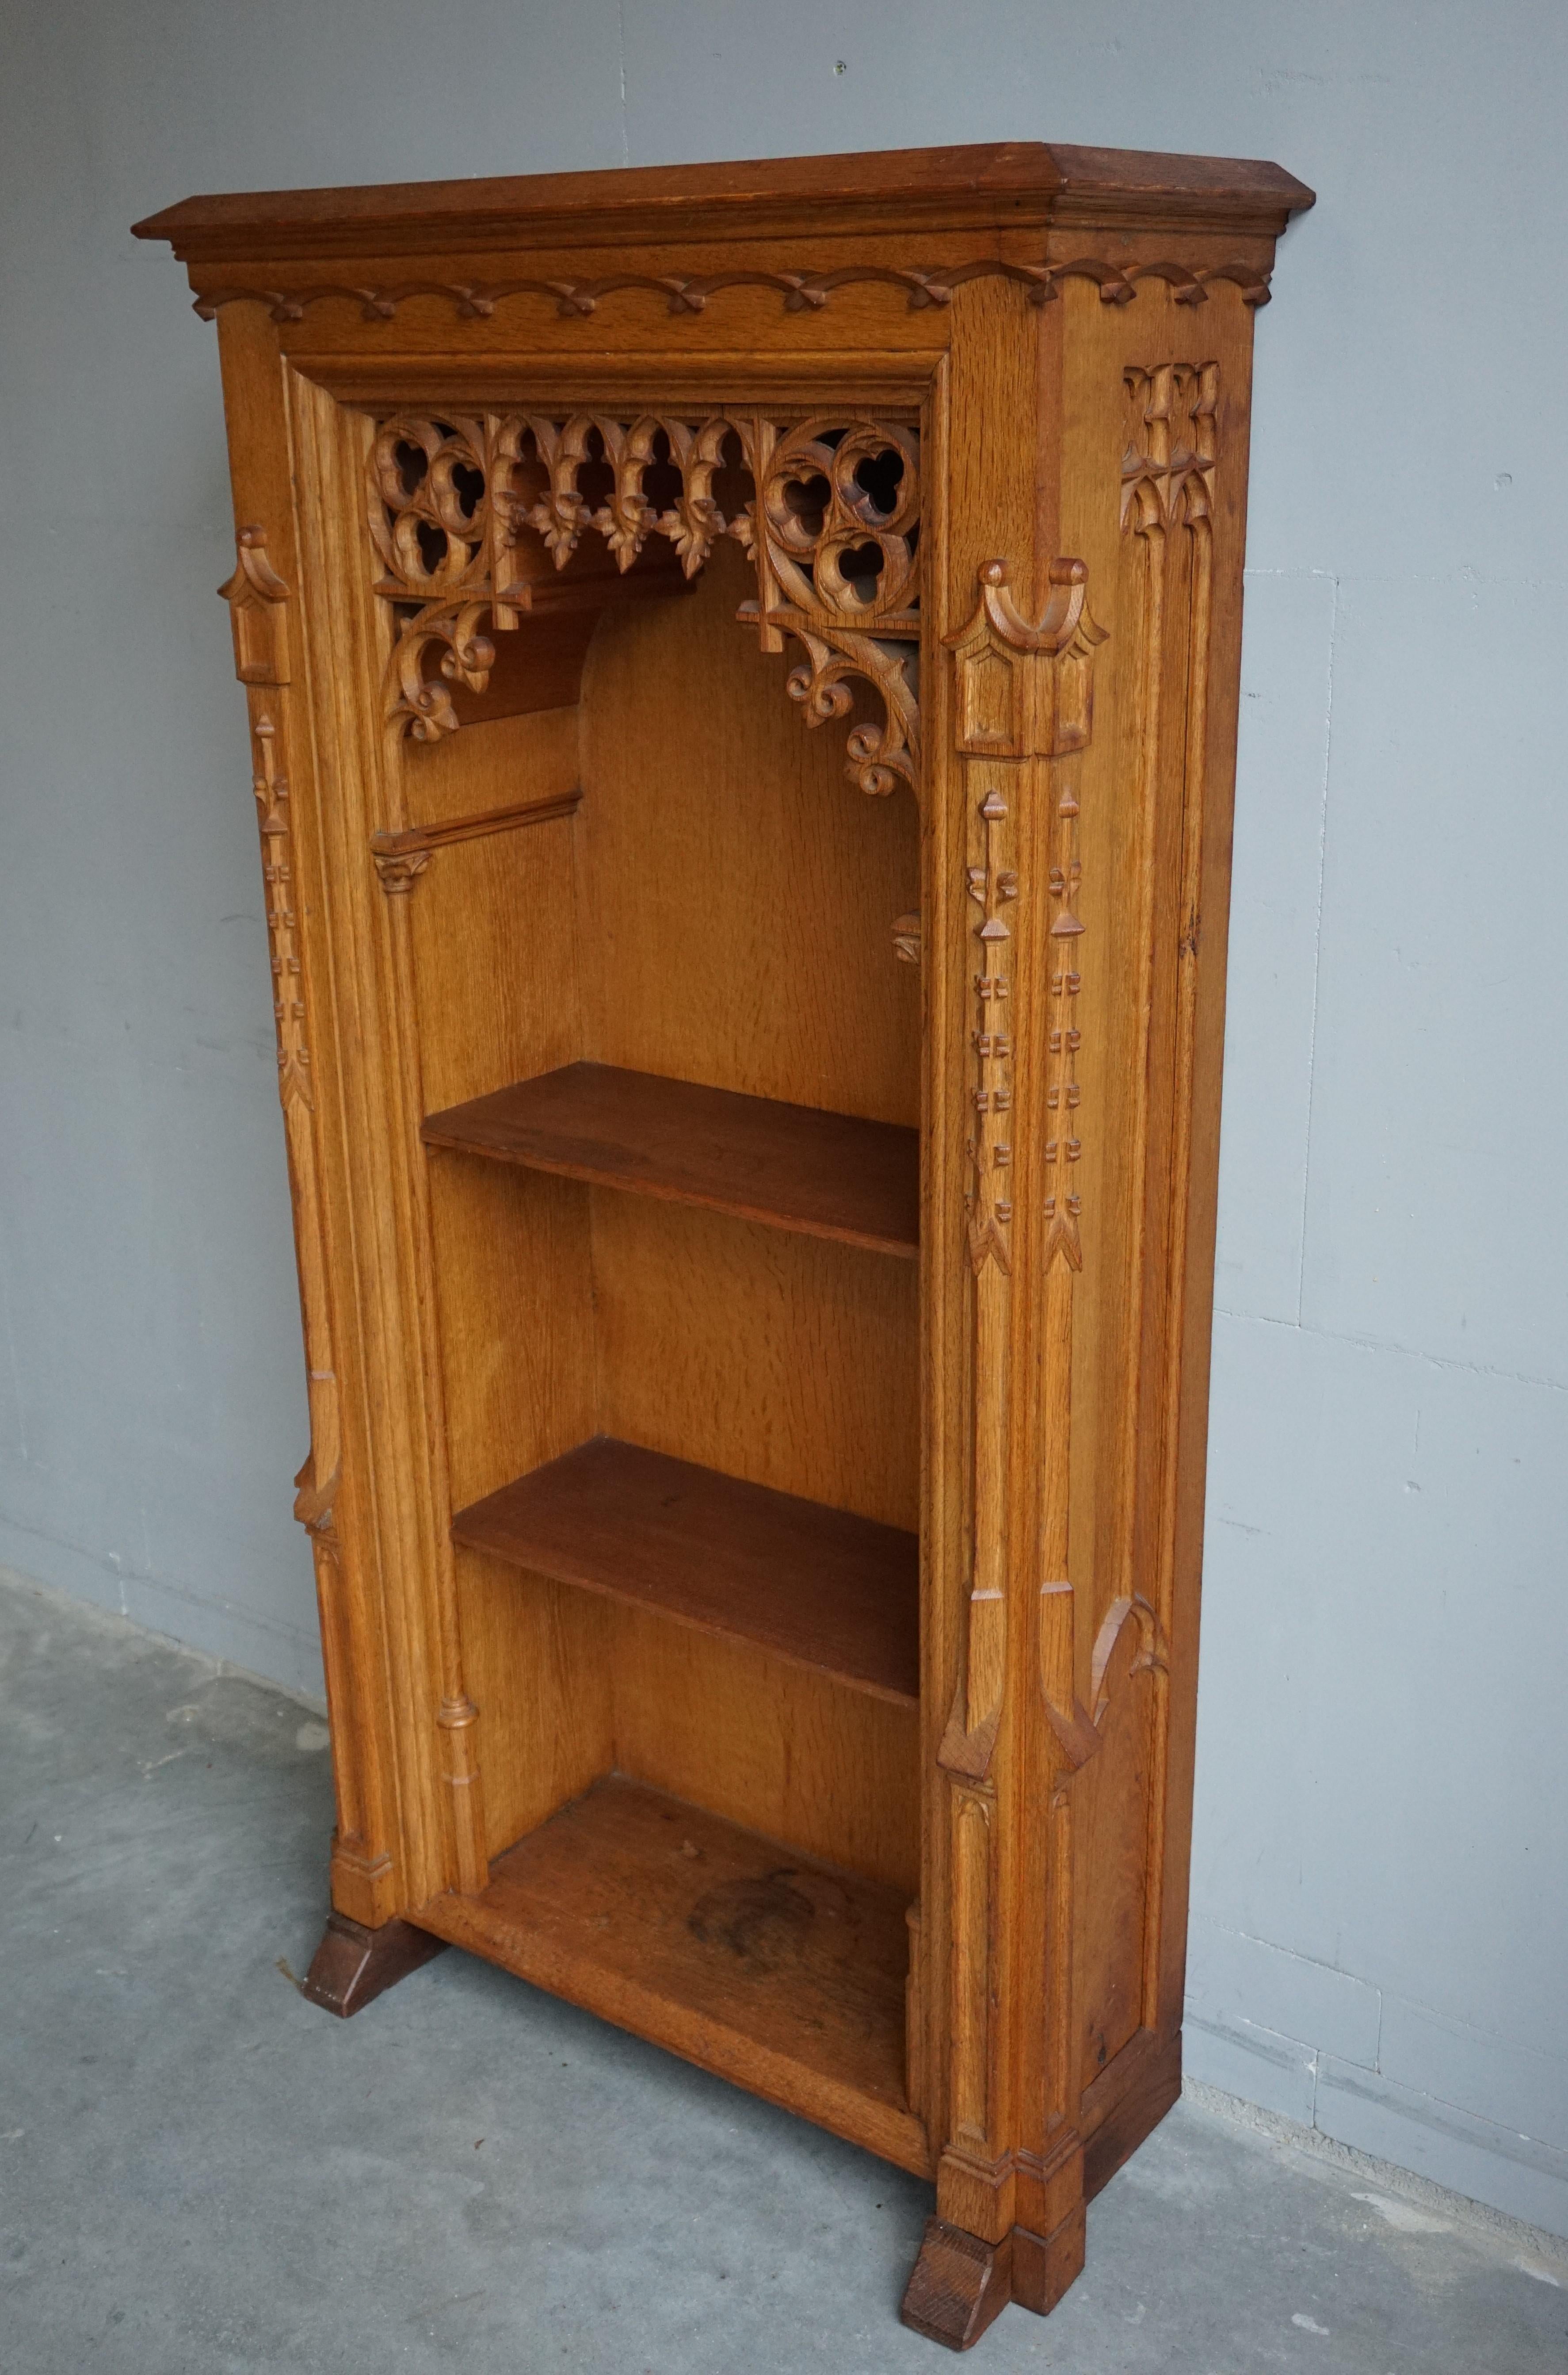 Glorious design and heavy quality, solid oak Gothic cabinet.

This practical size, beautifully handcrafted and very thick oak cabinet can be used for all kinds of purposes. It dates from the earliest days of the 20th century (or possibly the late